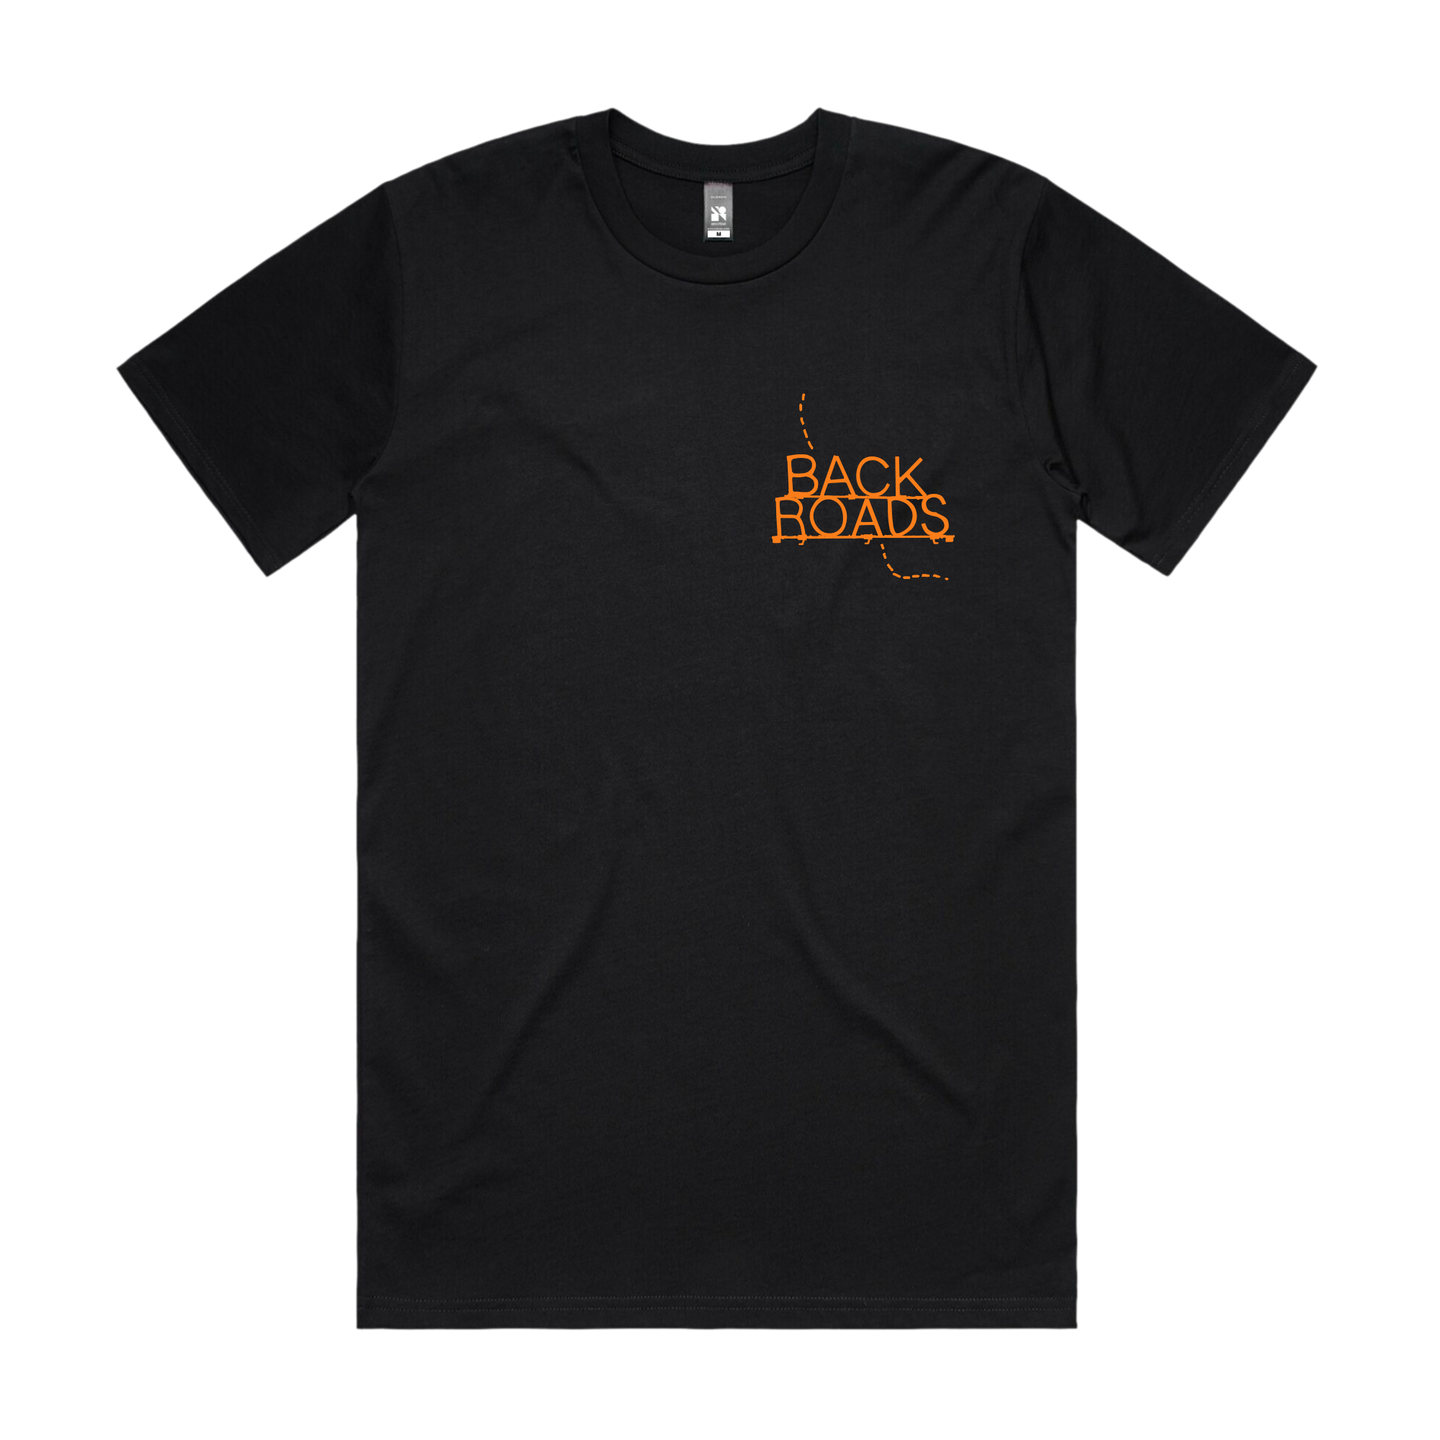 Back Roads Black T-Shirt with Marching Ant Logo Design